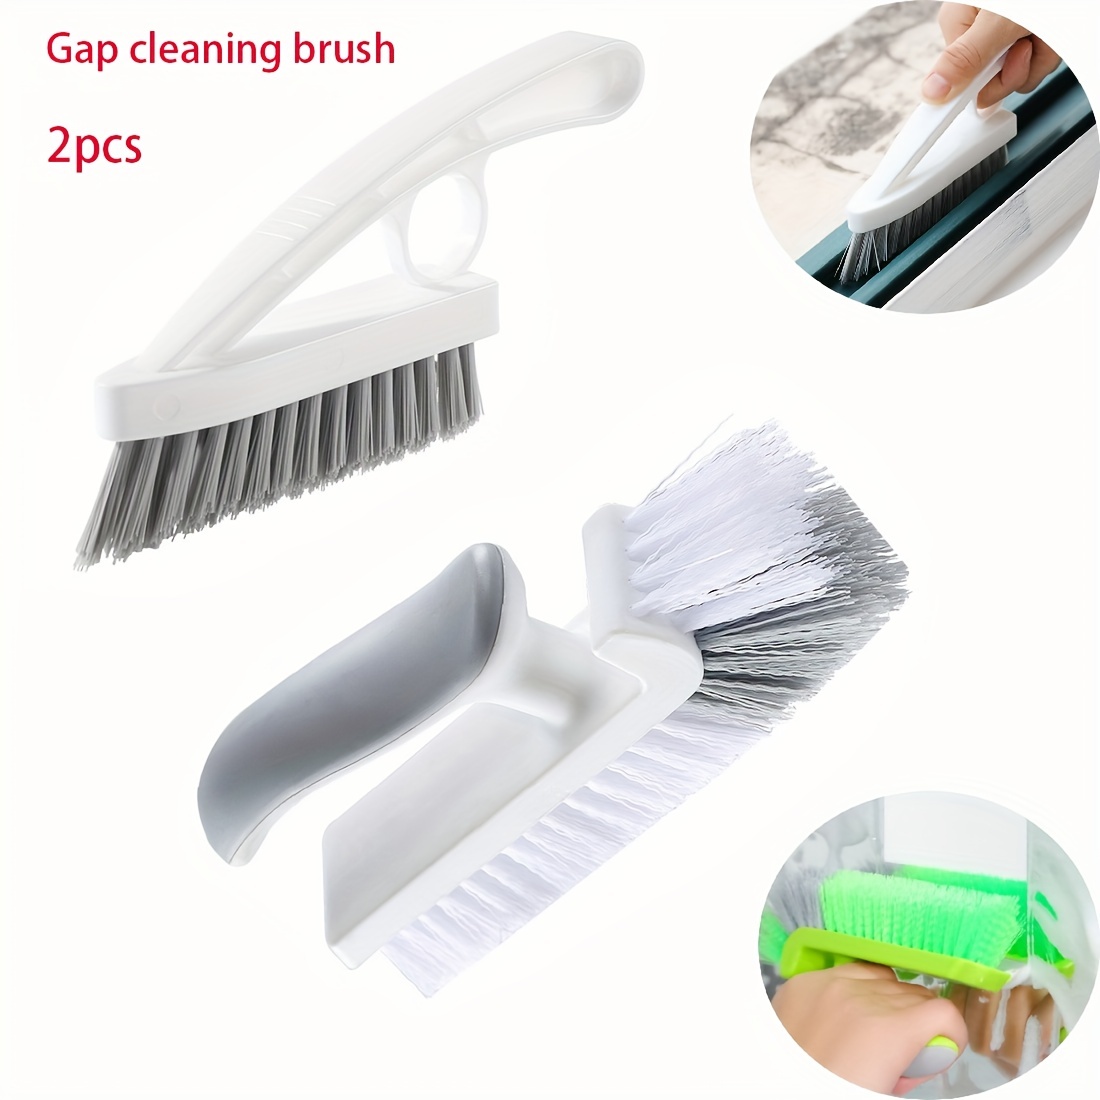 2 PCS Crevice Cleaning Brush, Hard Bristle Crevice Cleaning Brush